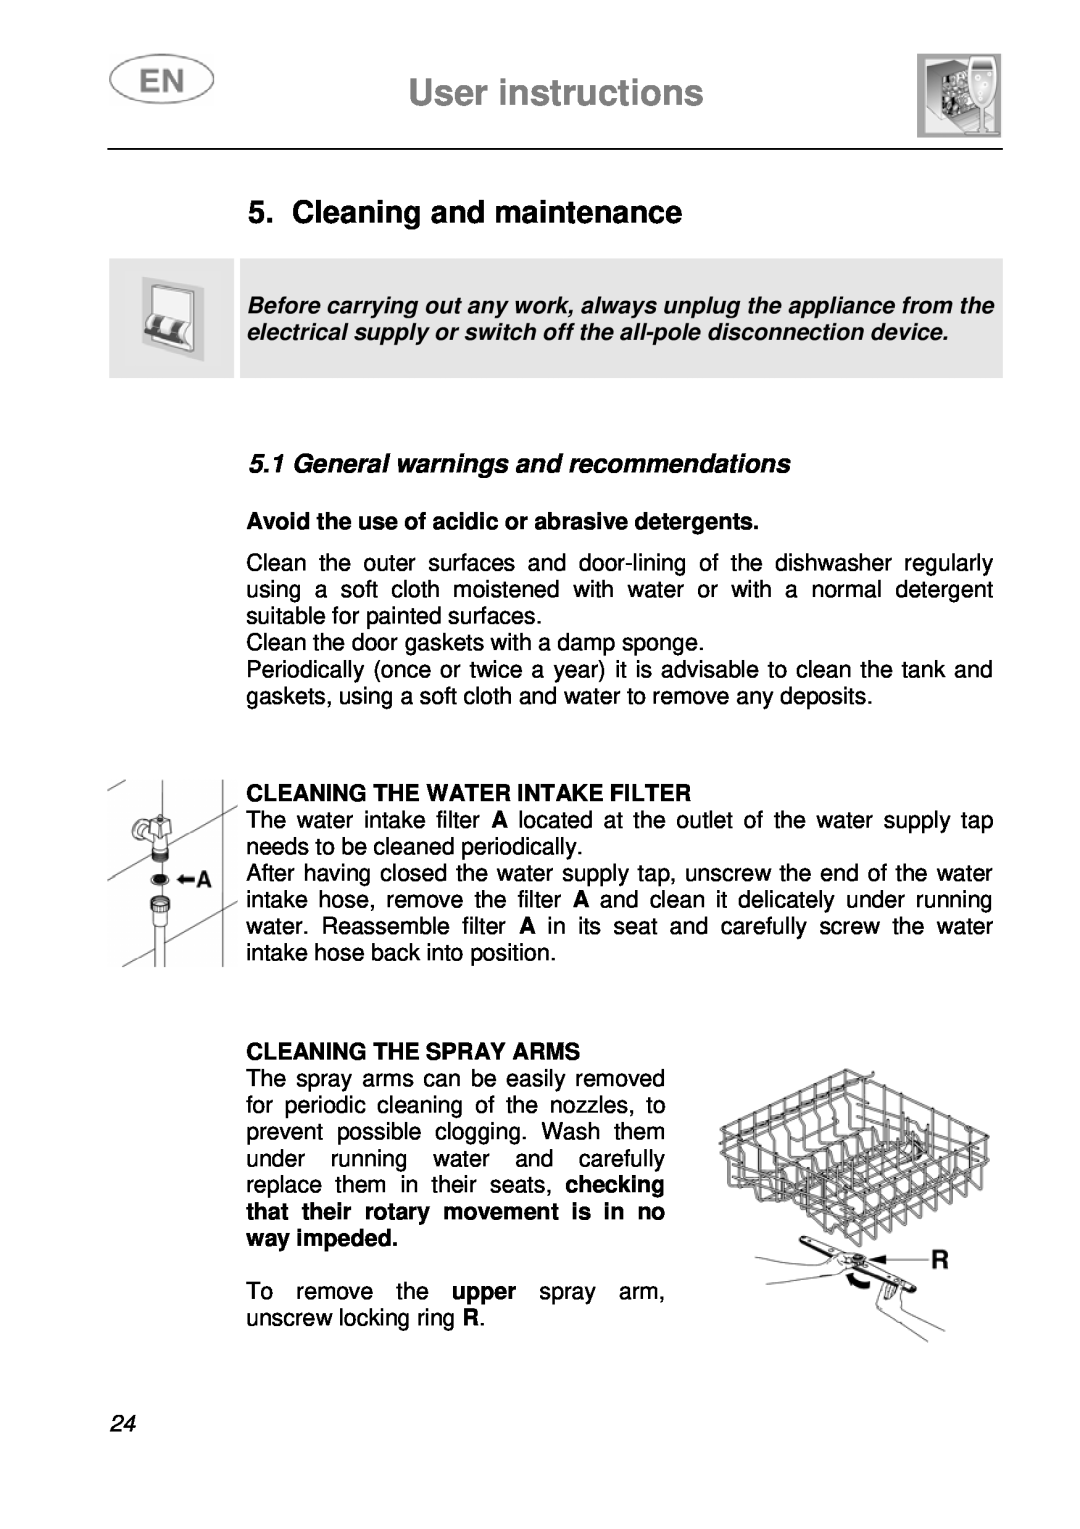 Smeg ST4108 Cleaning and maintenance, General warnings and recommendations, User instructions, Cleaning The Spray Arms 